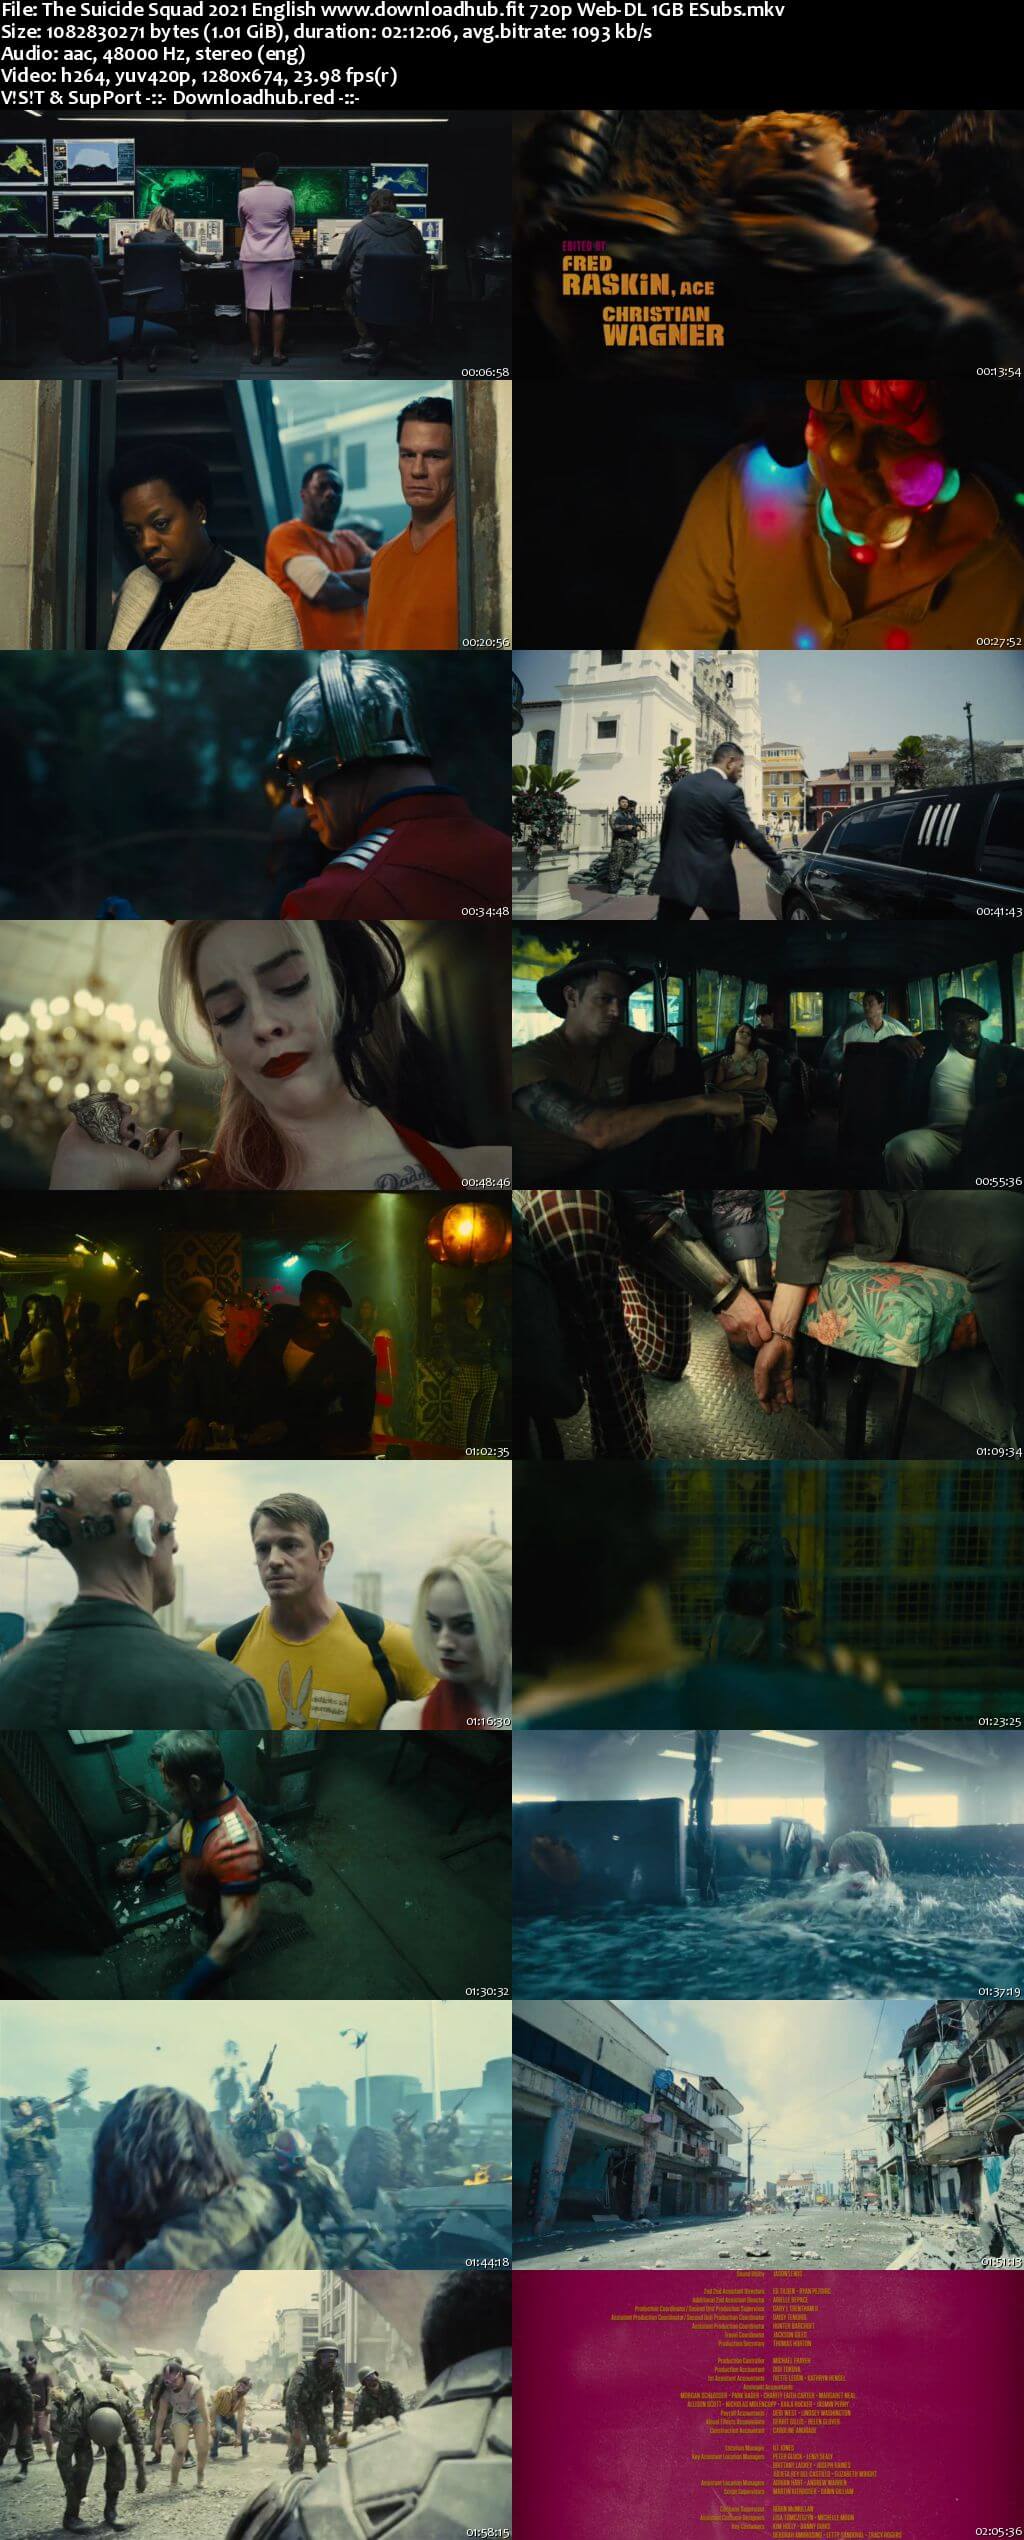 The Suicide Squad 2021 English 720p Web-DL 1GB ESubs